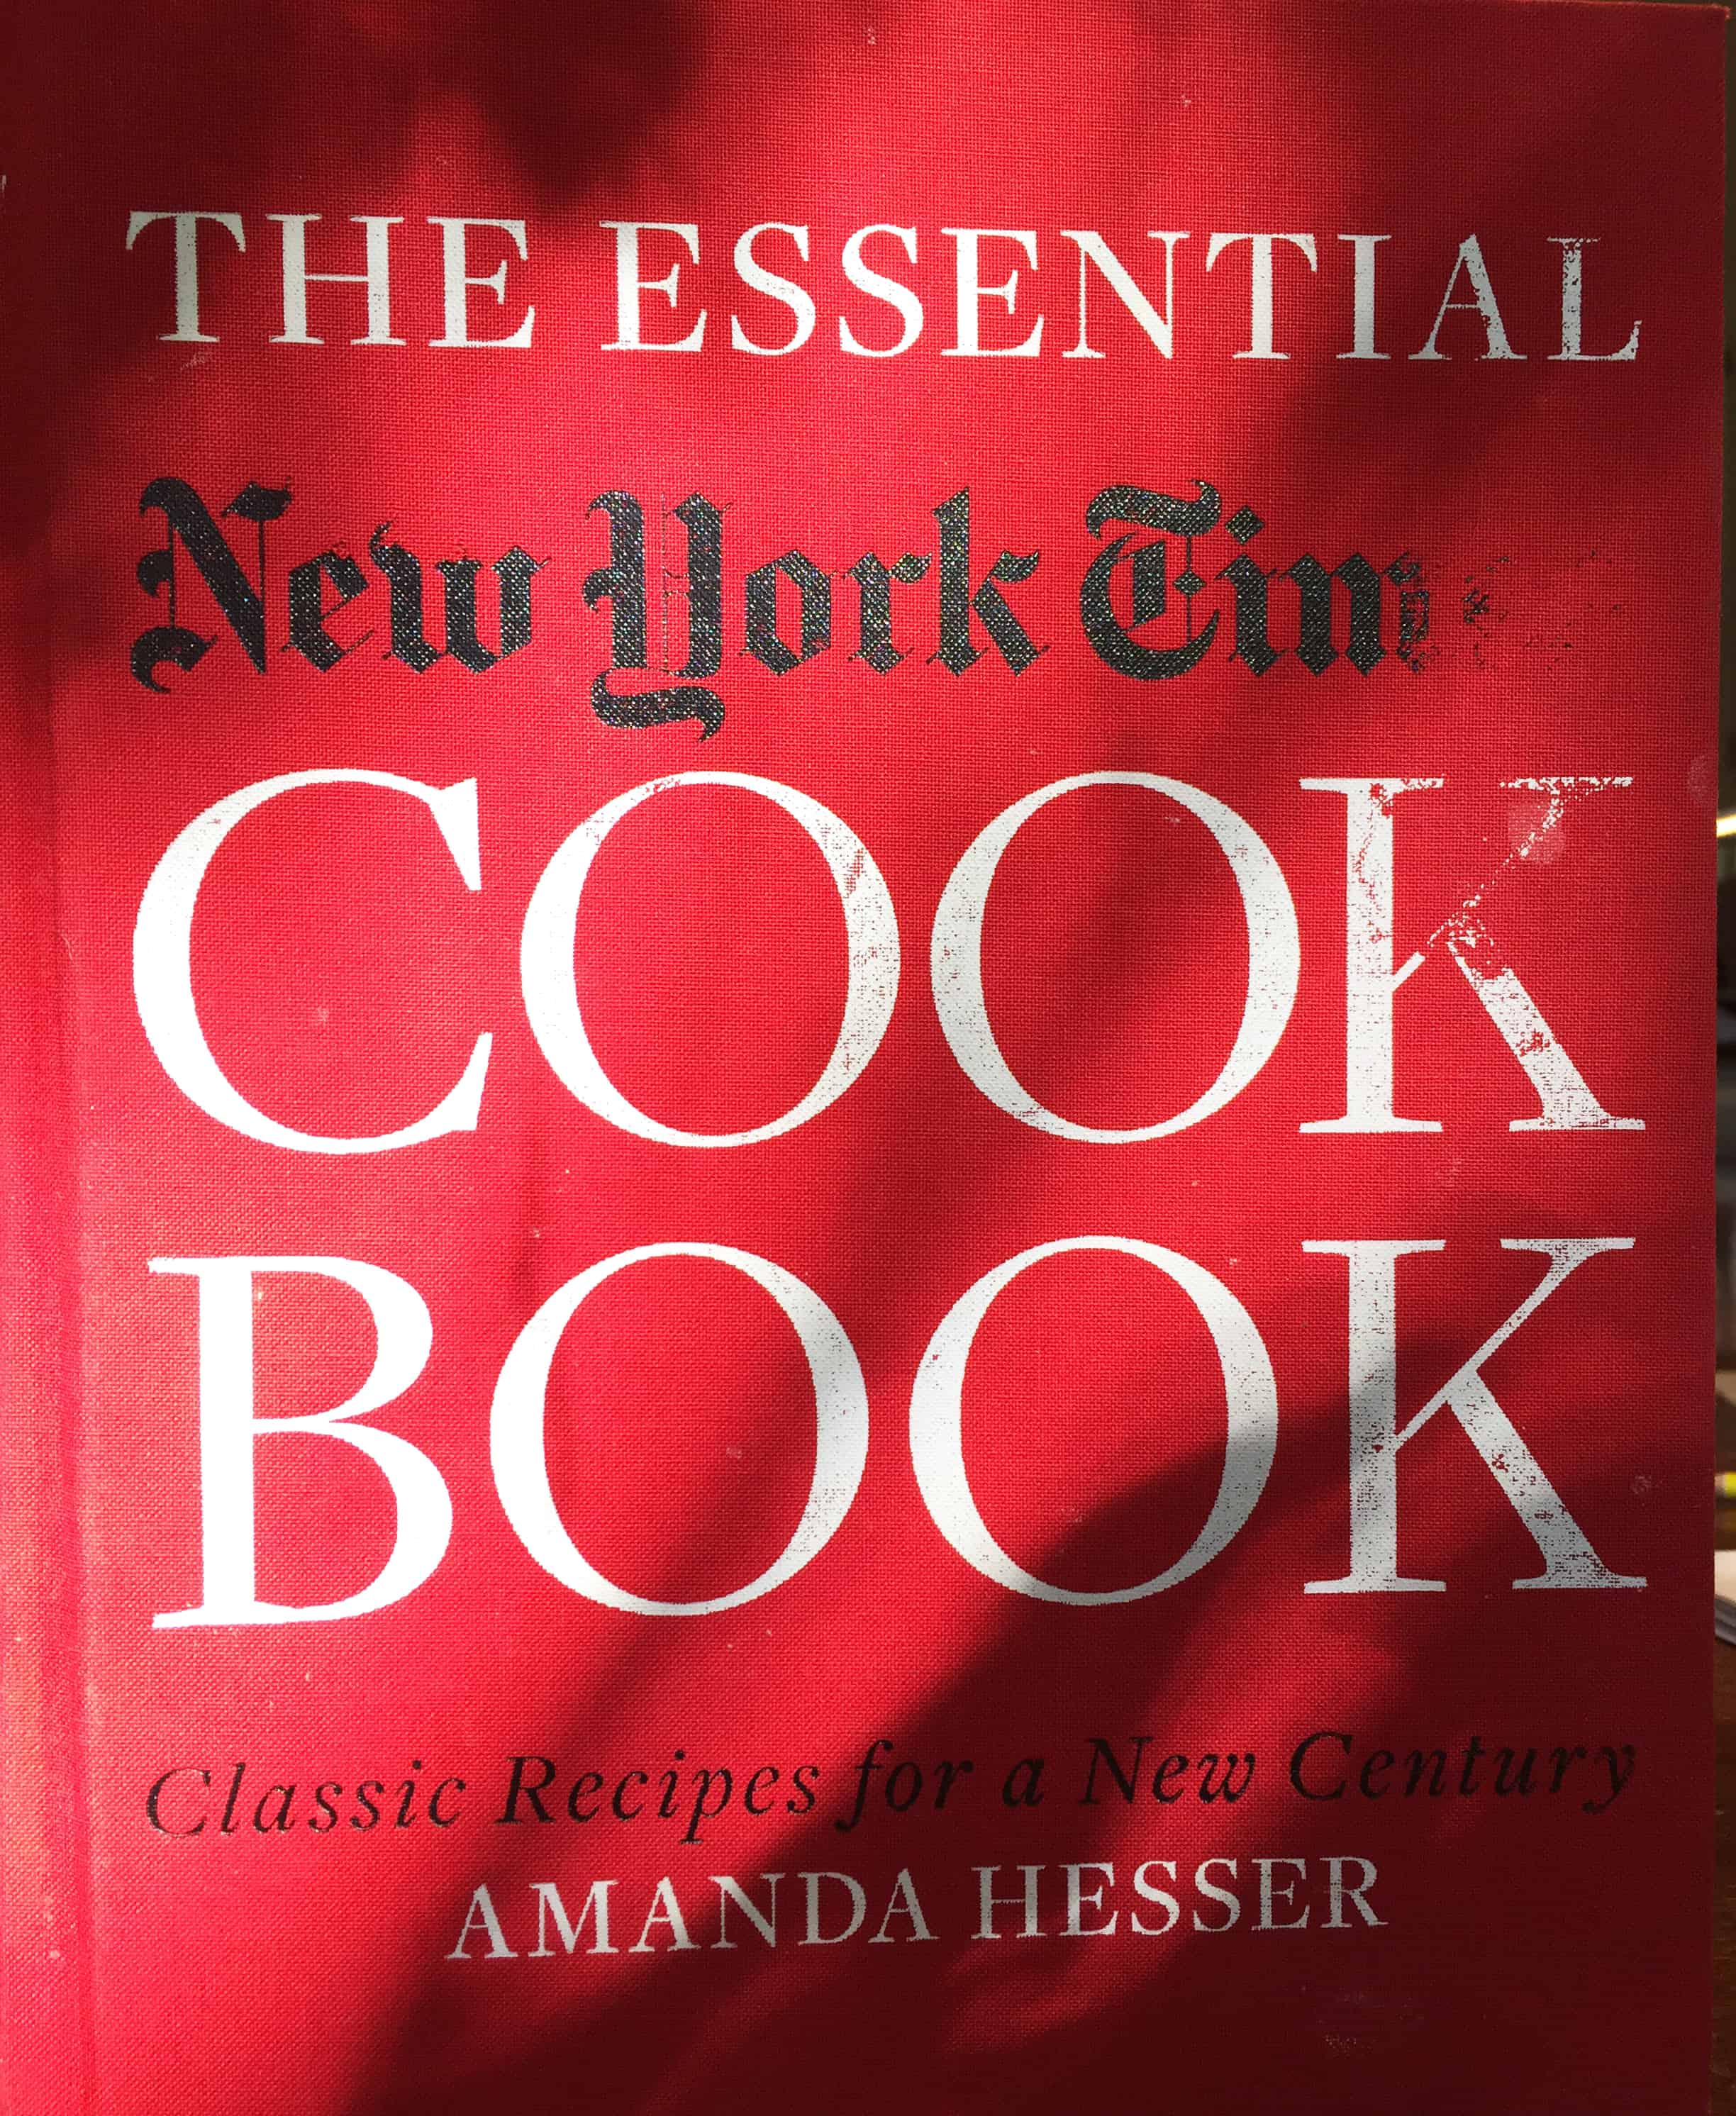 Essential New York Times Cookbook with brownie recipe